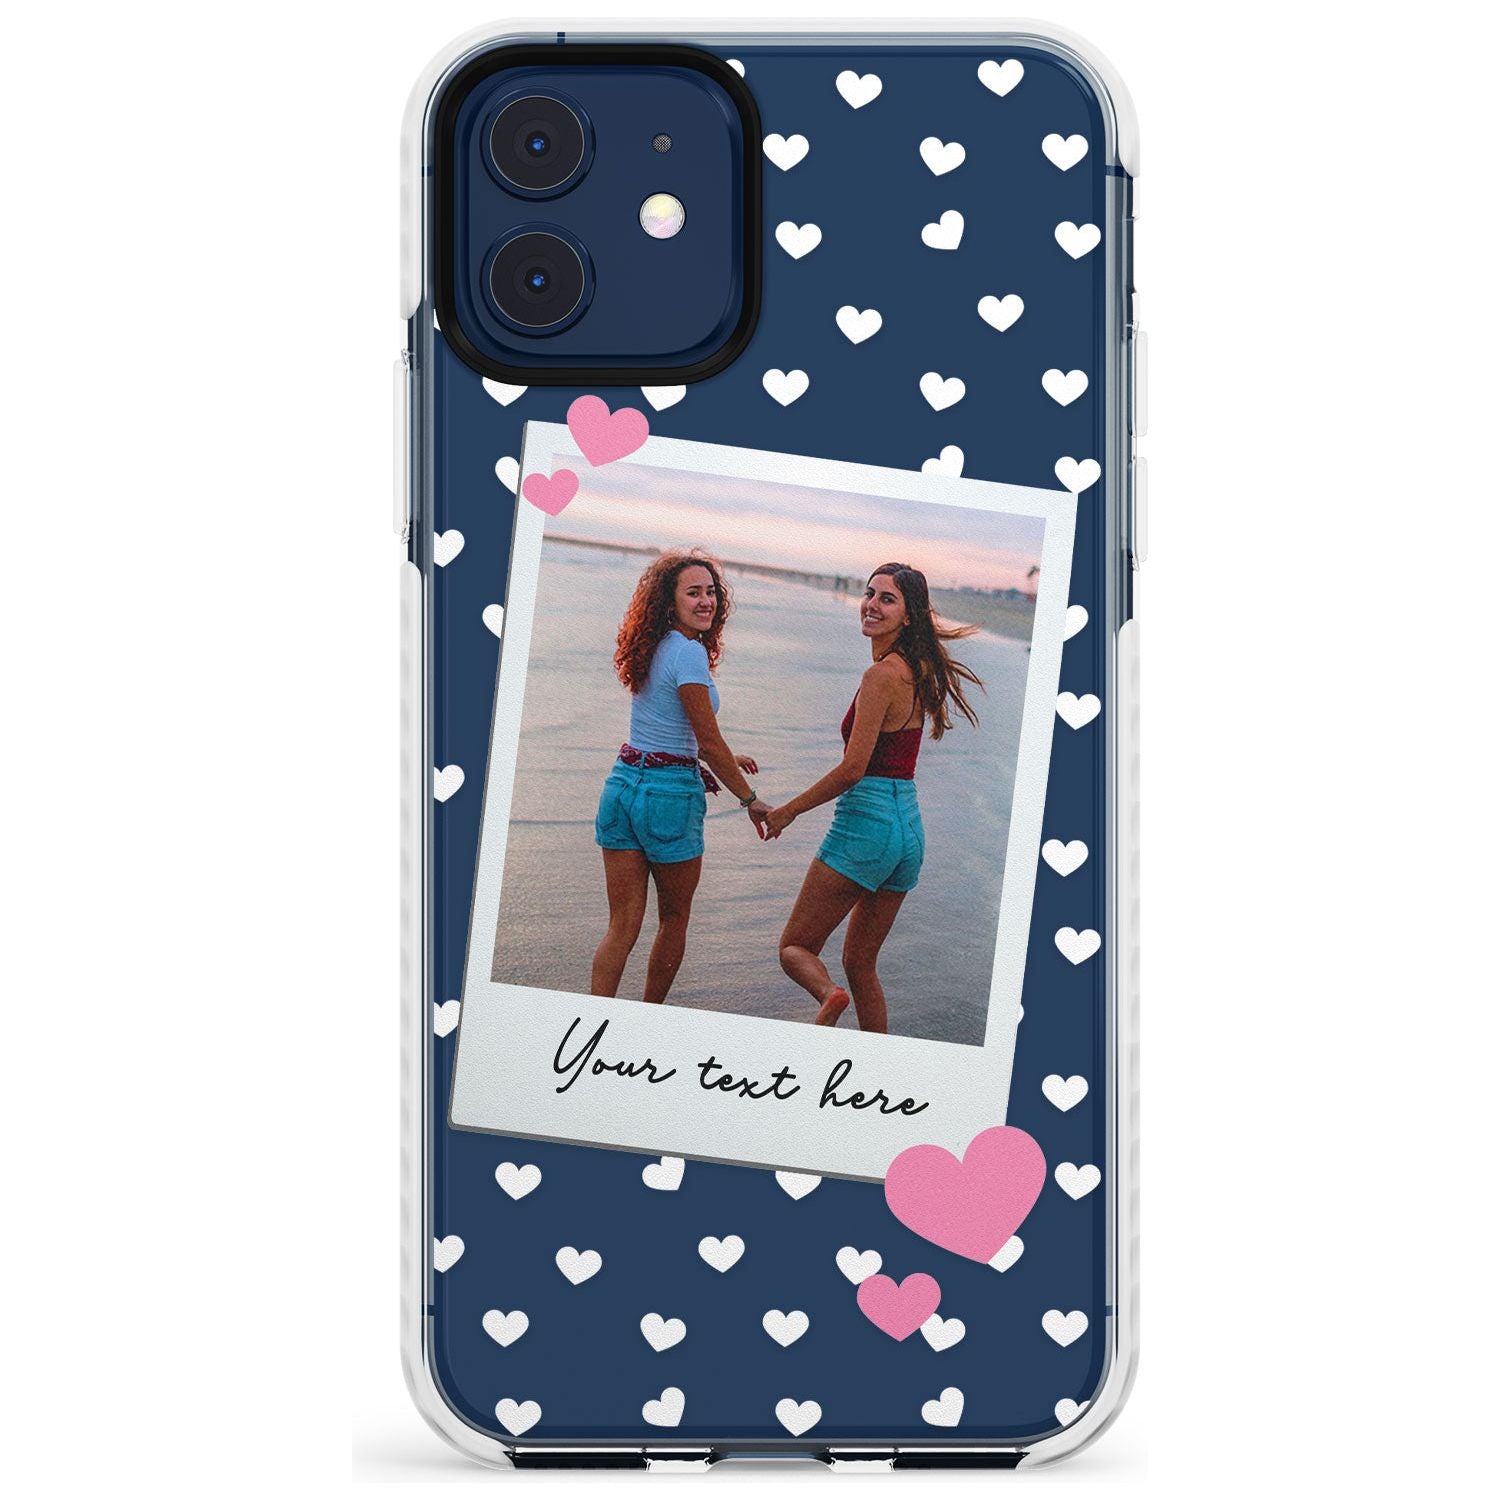 Instant Film & Hearts Slim TPU Phone Case for iPhone 11